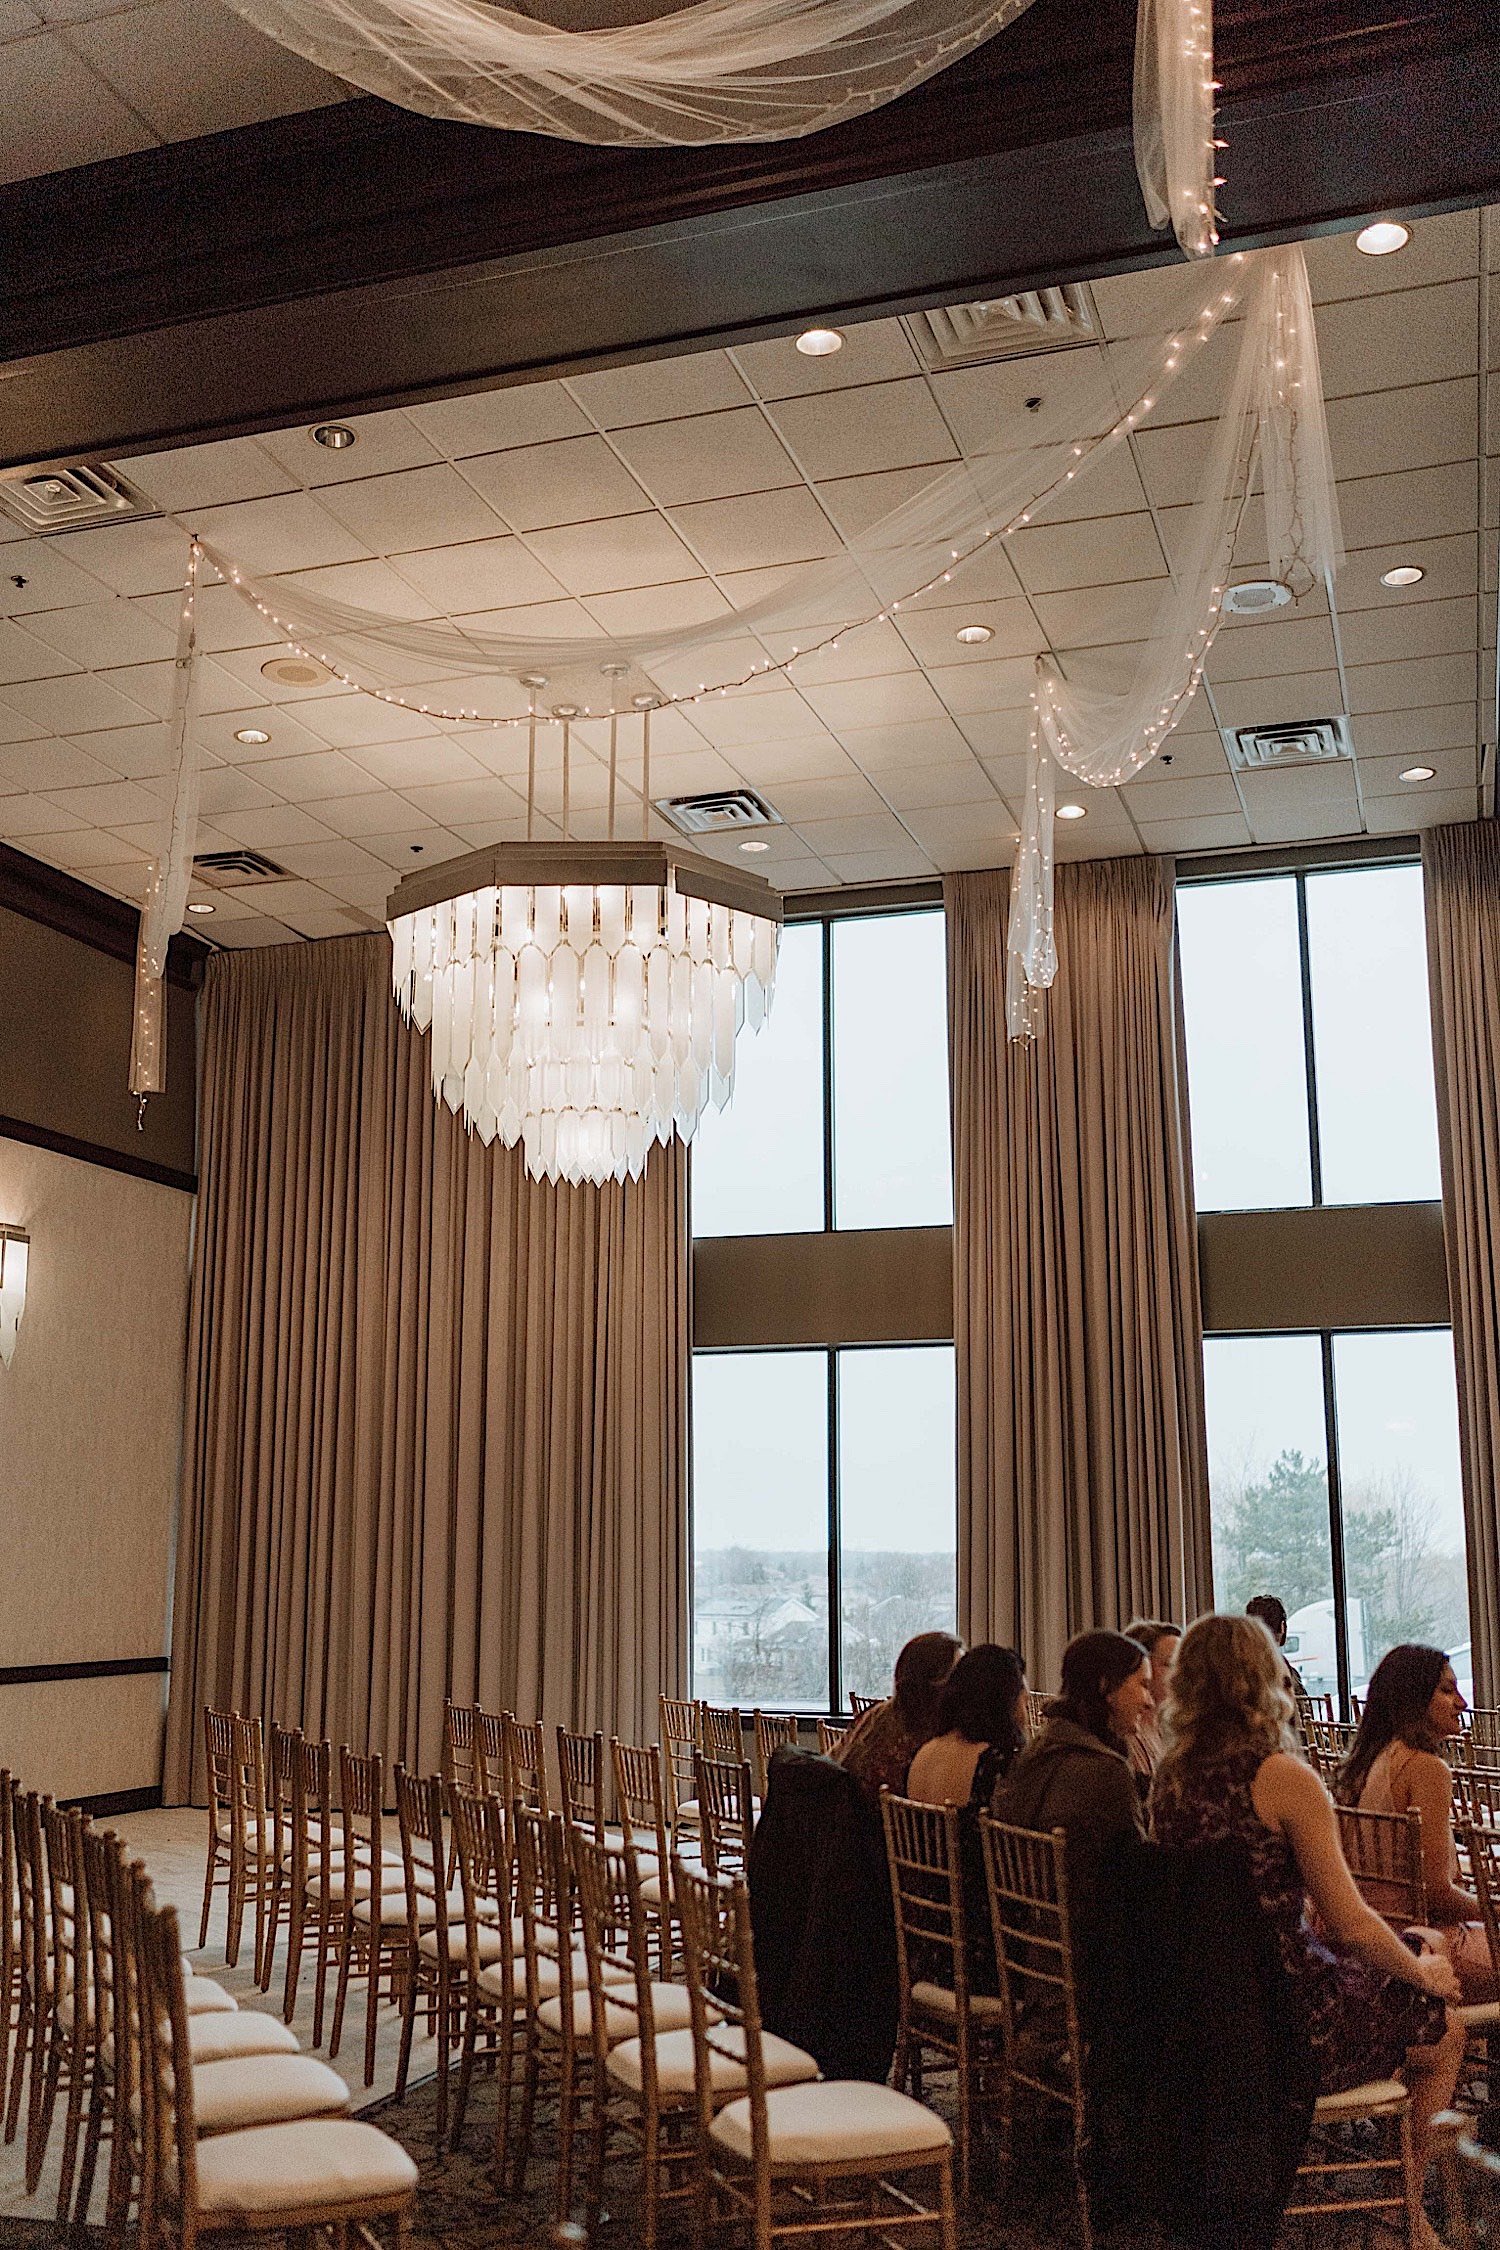 Guests seated in a ballroom for a wedding with a large glass chandelier overhead